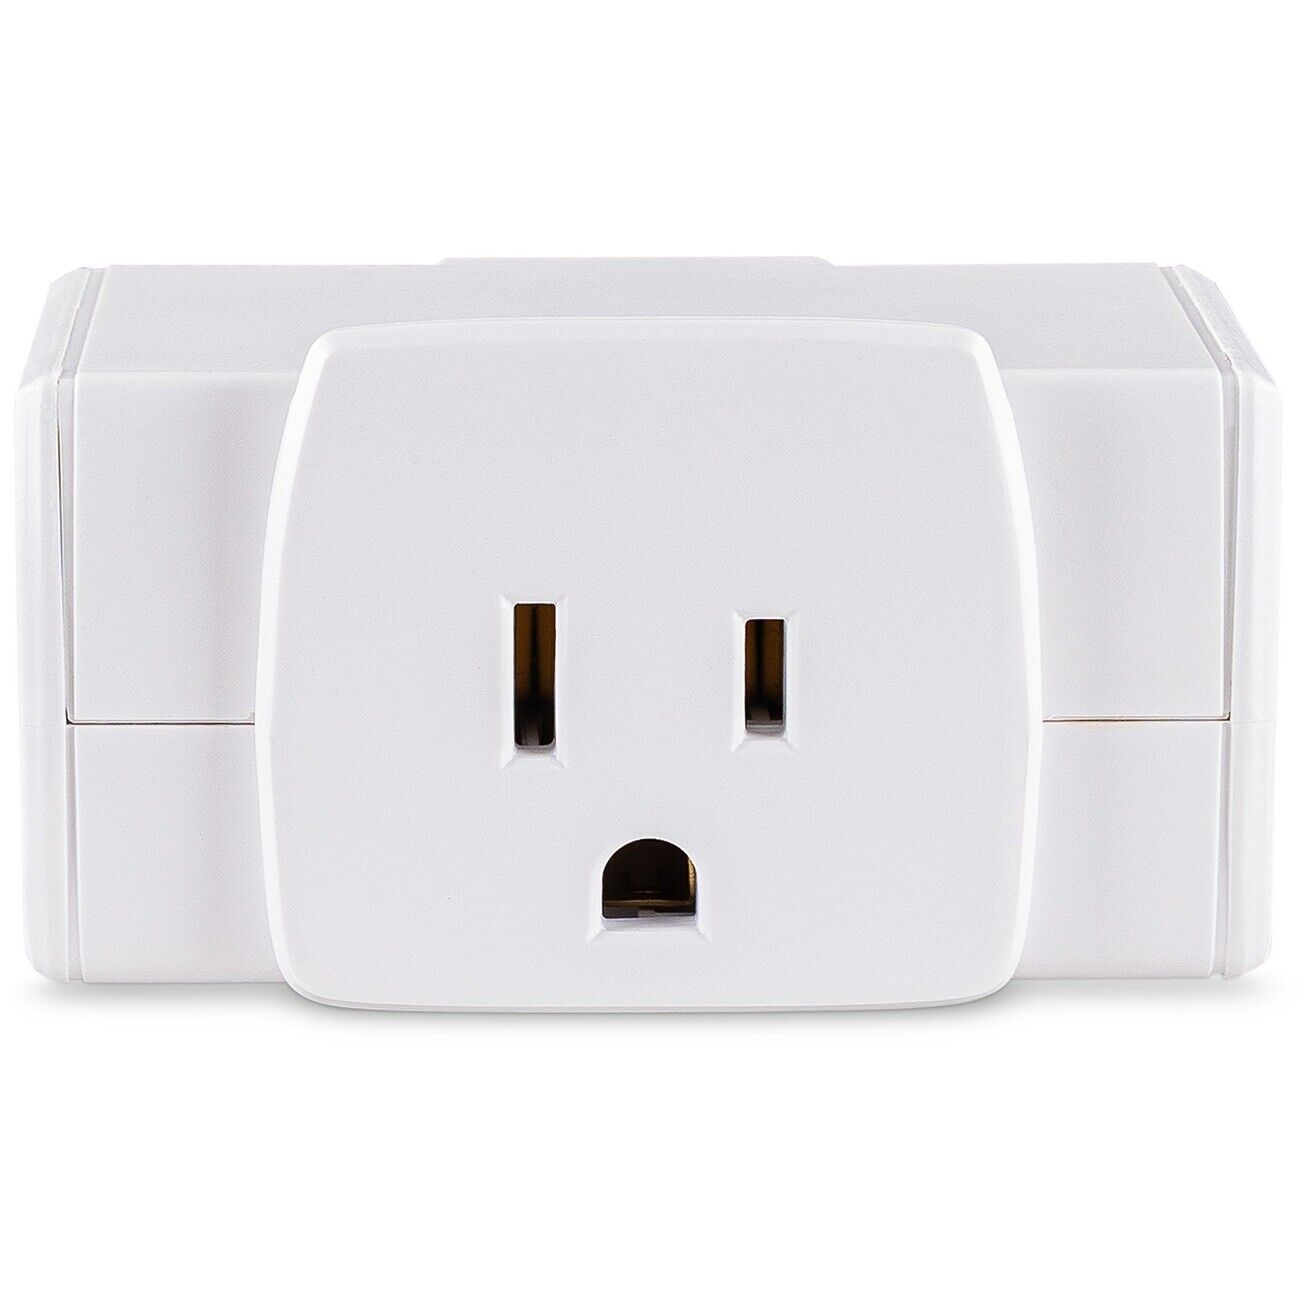 Cyber Power Systems GT3WT 3 Sided Wall Tap Outlet